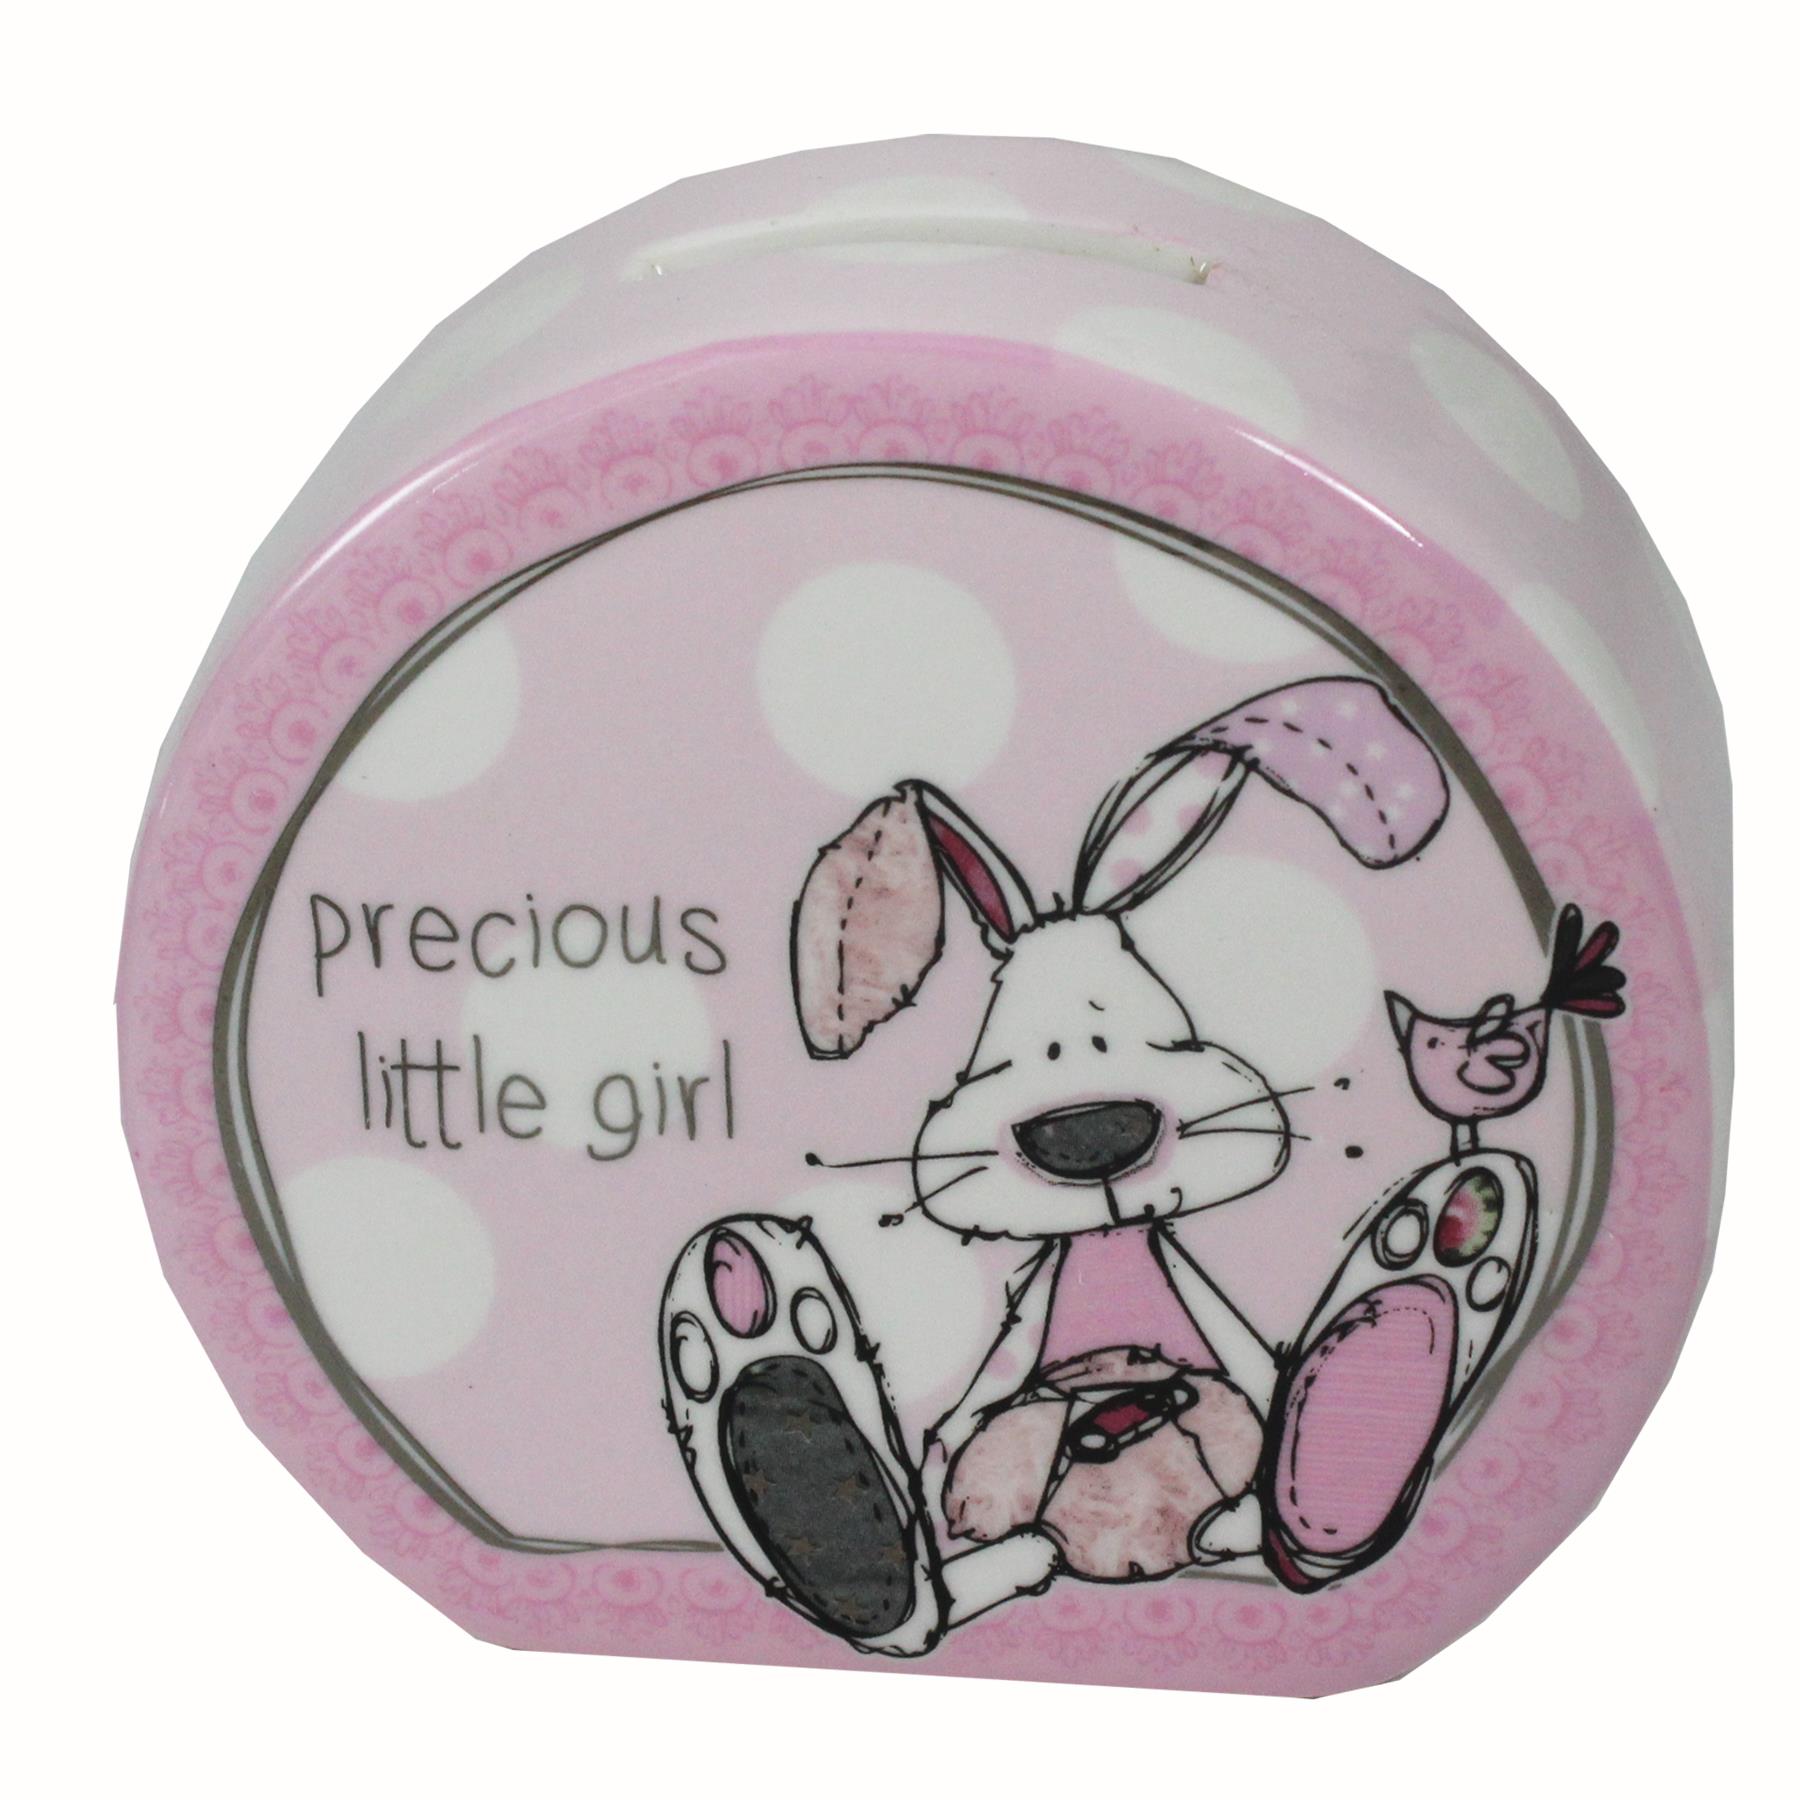 New Baby Ceramic Money Box Little Miracles by Tracey Russell - Girl